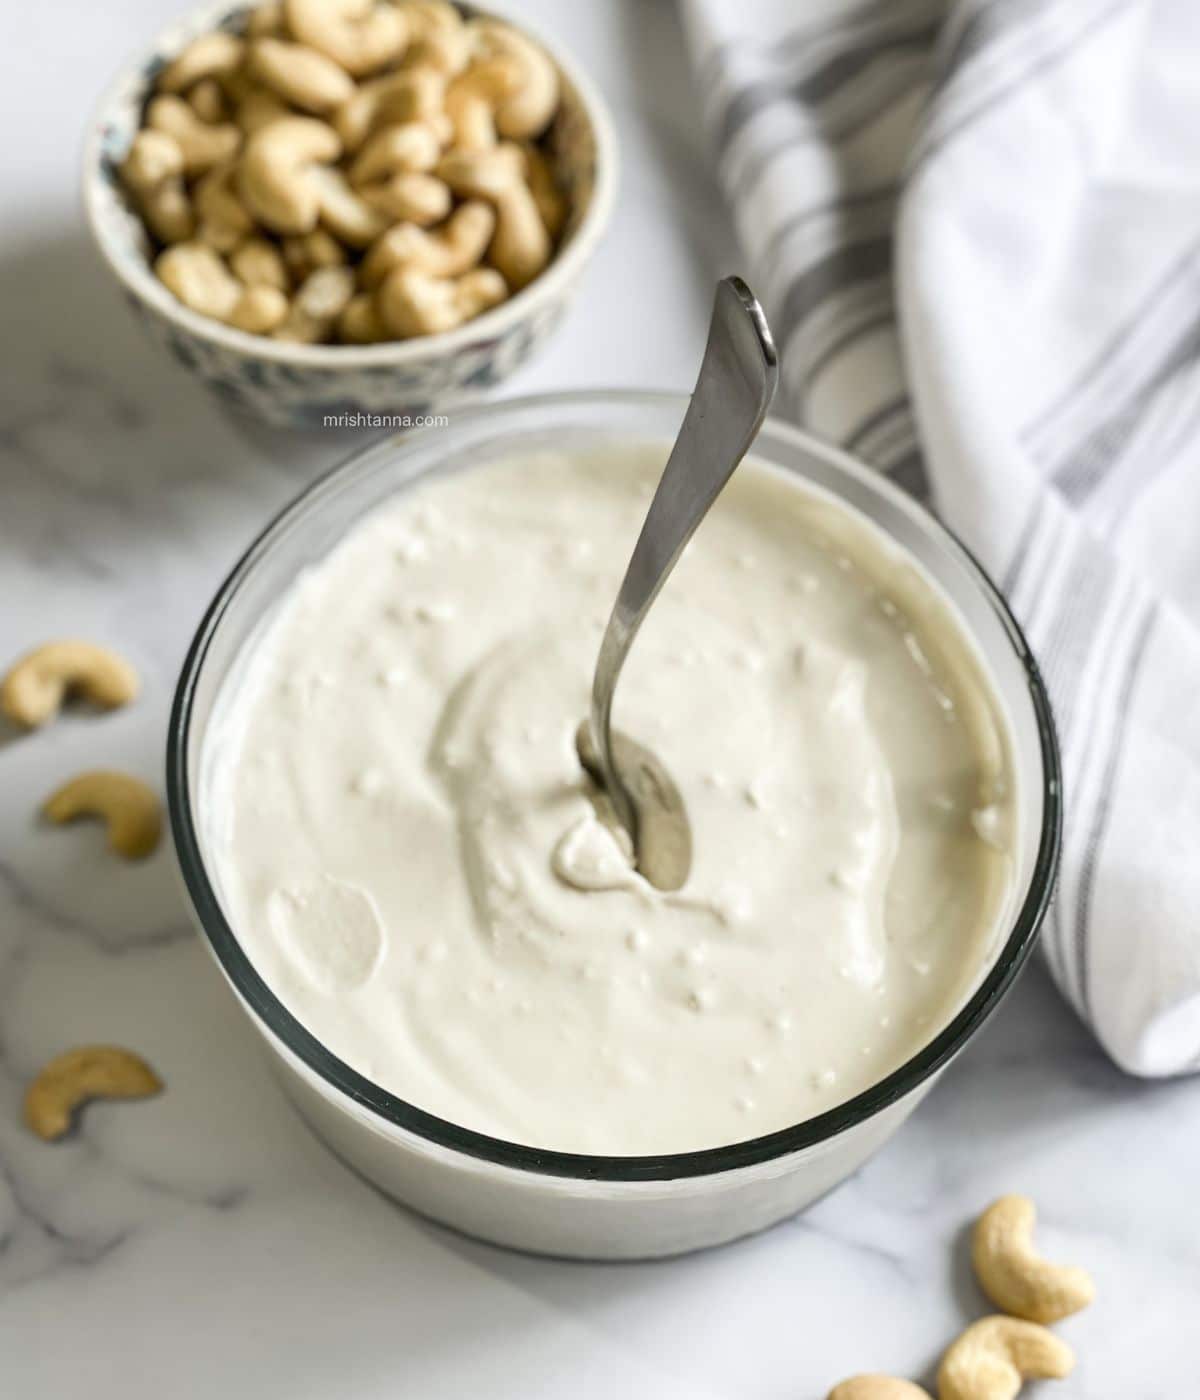 A glass bowl has cashew yogurt and in the center a spoon is inserted.